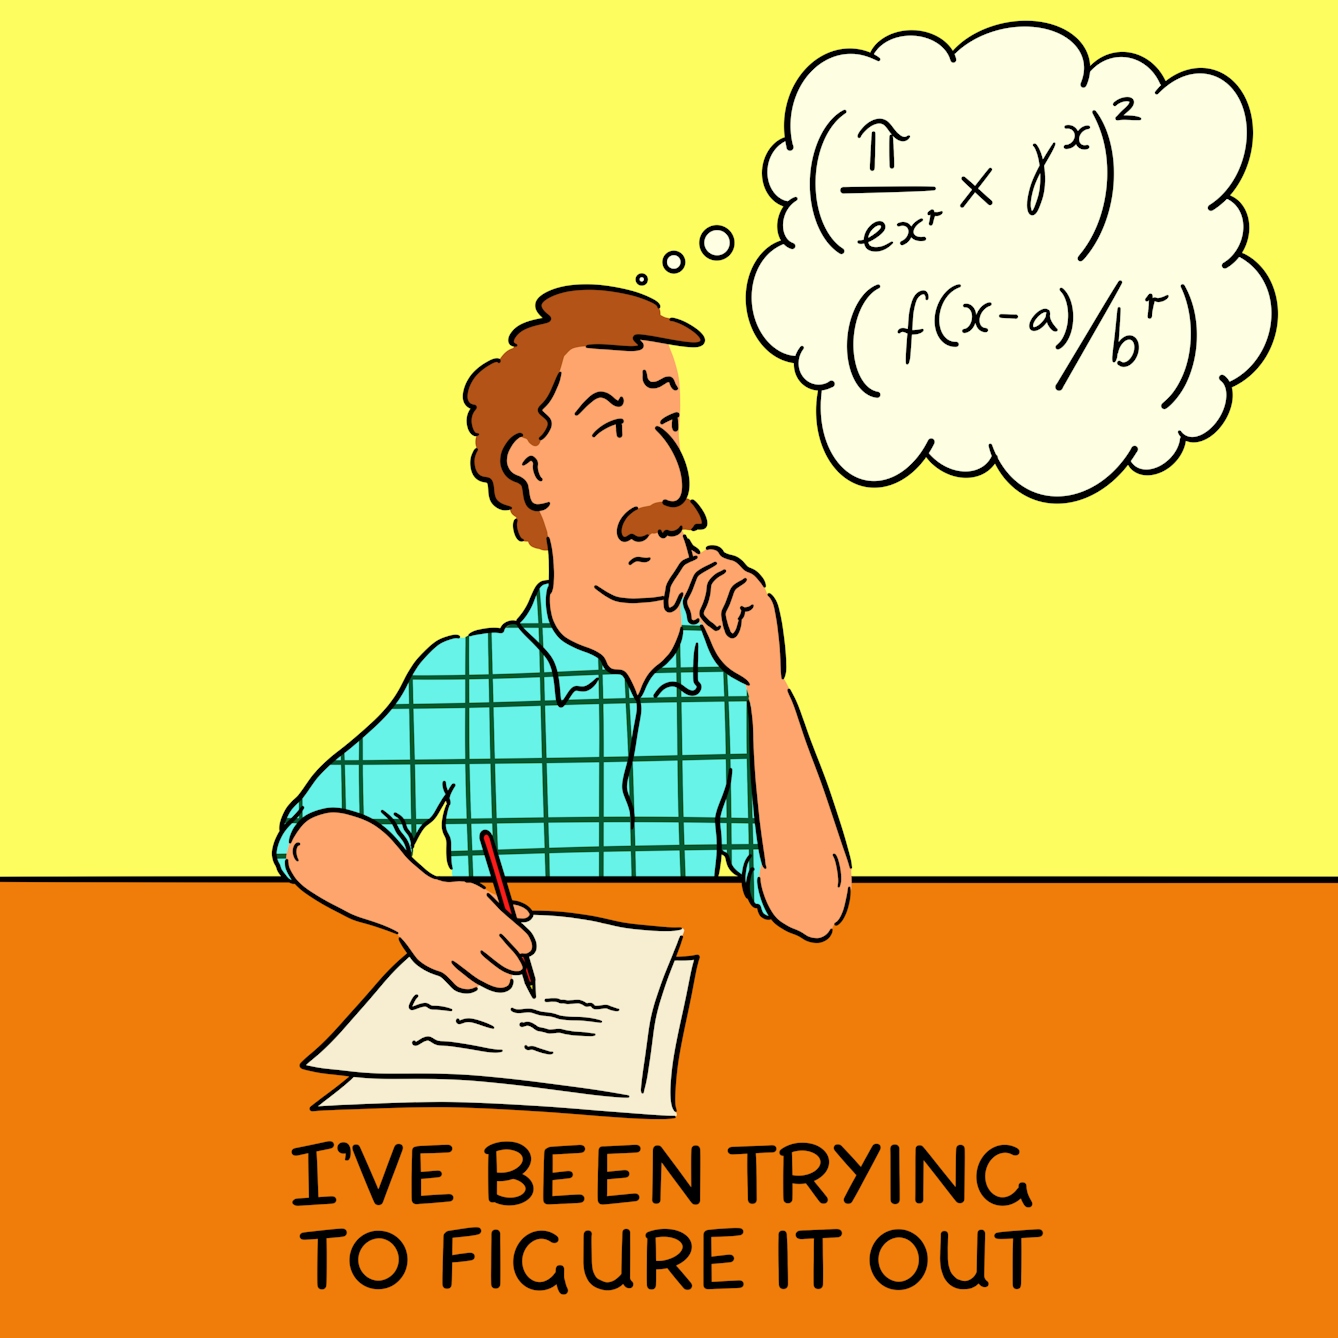 Panel 1 of a four-panel comic drawn digitally: a man with a plaid shirt and moustache leans on a desk with papers on, writing. He has his left hand raised to his chin and a thoughtful expression. A thought bubble coming from his head is filled with mathematical formulae.
The caption text reads "I've been trying to figure it out"